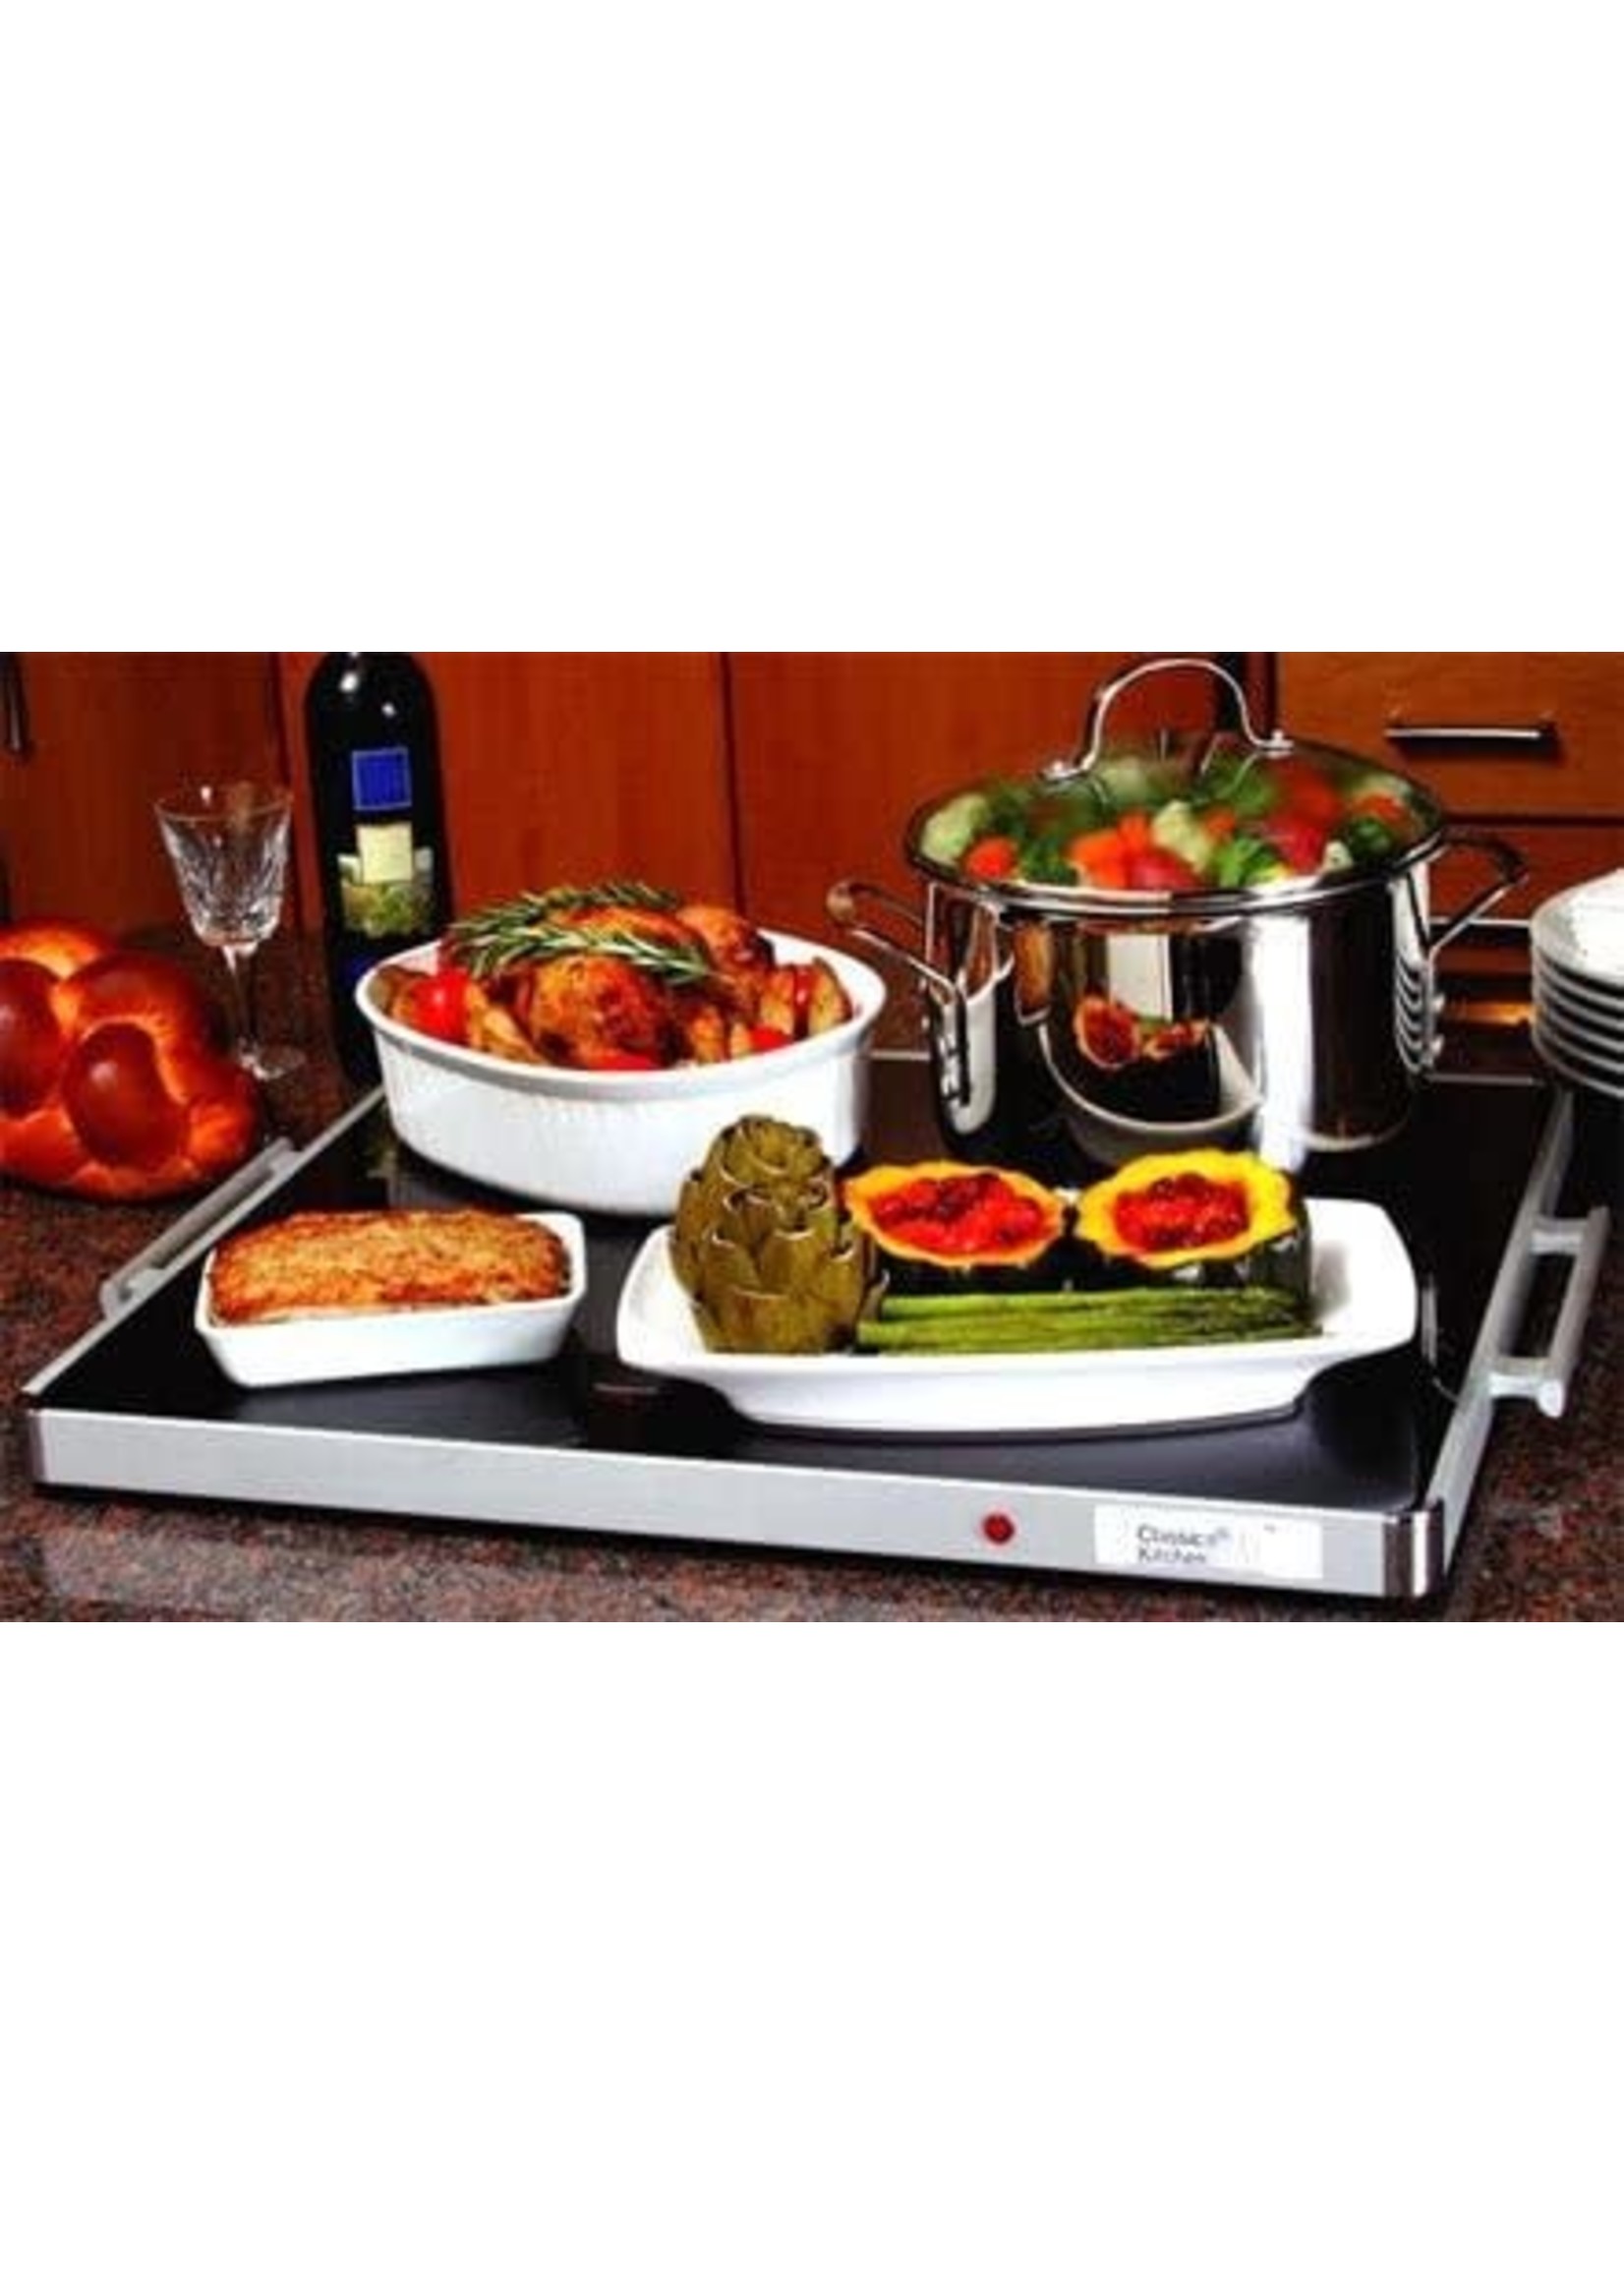 DELUXE GLASS WARMING TRAY LRG MB-CK-2420